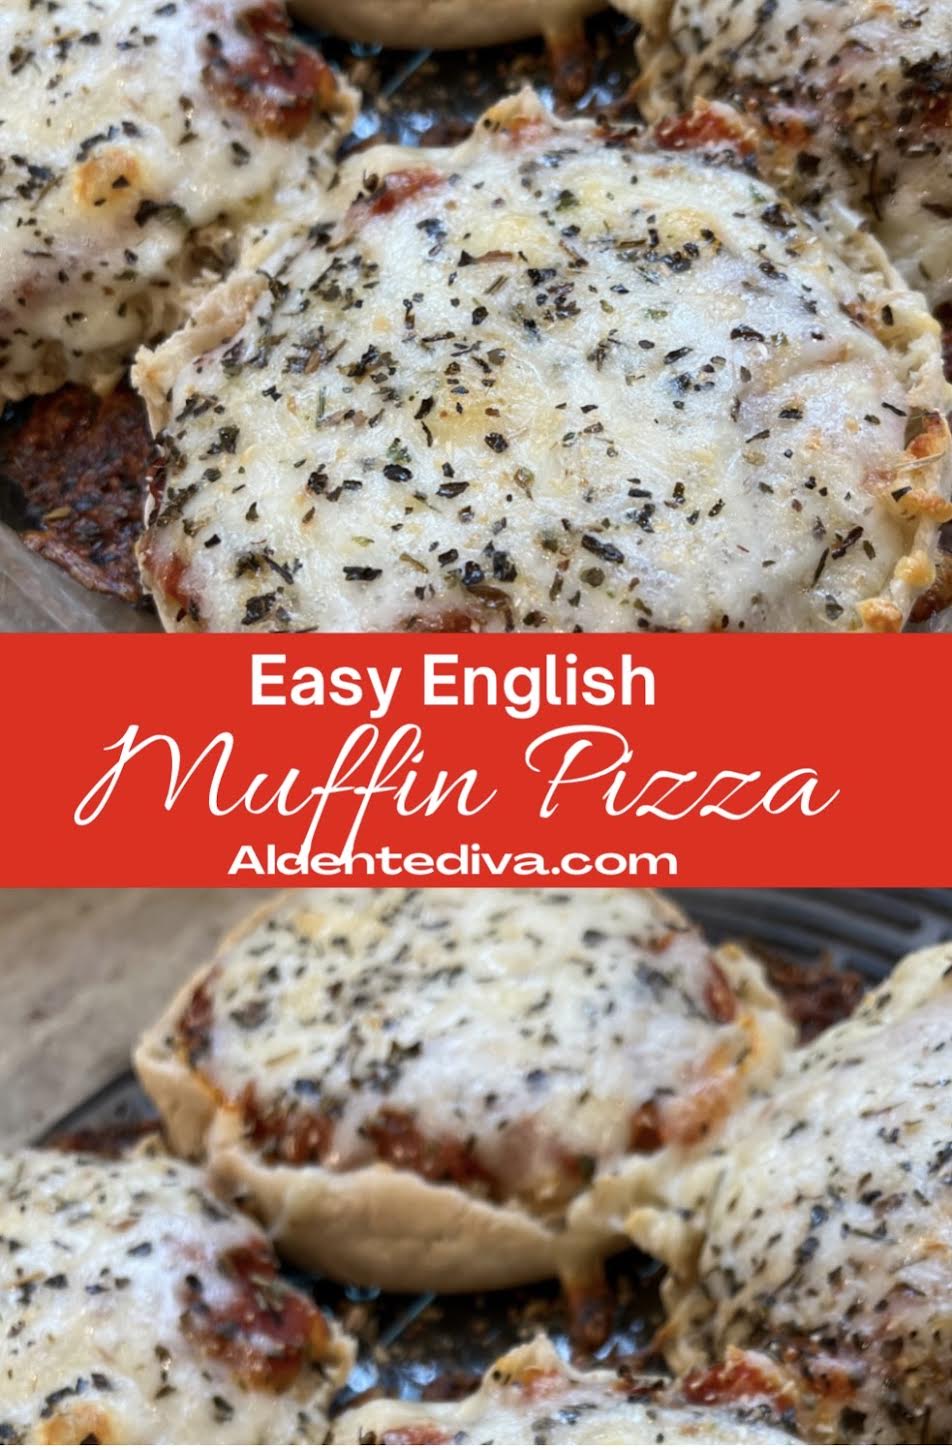 EASY ENGLISH MUFFIN PIZZAS